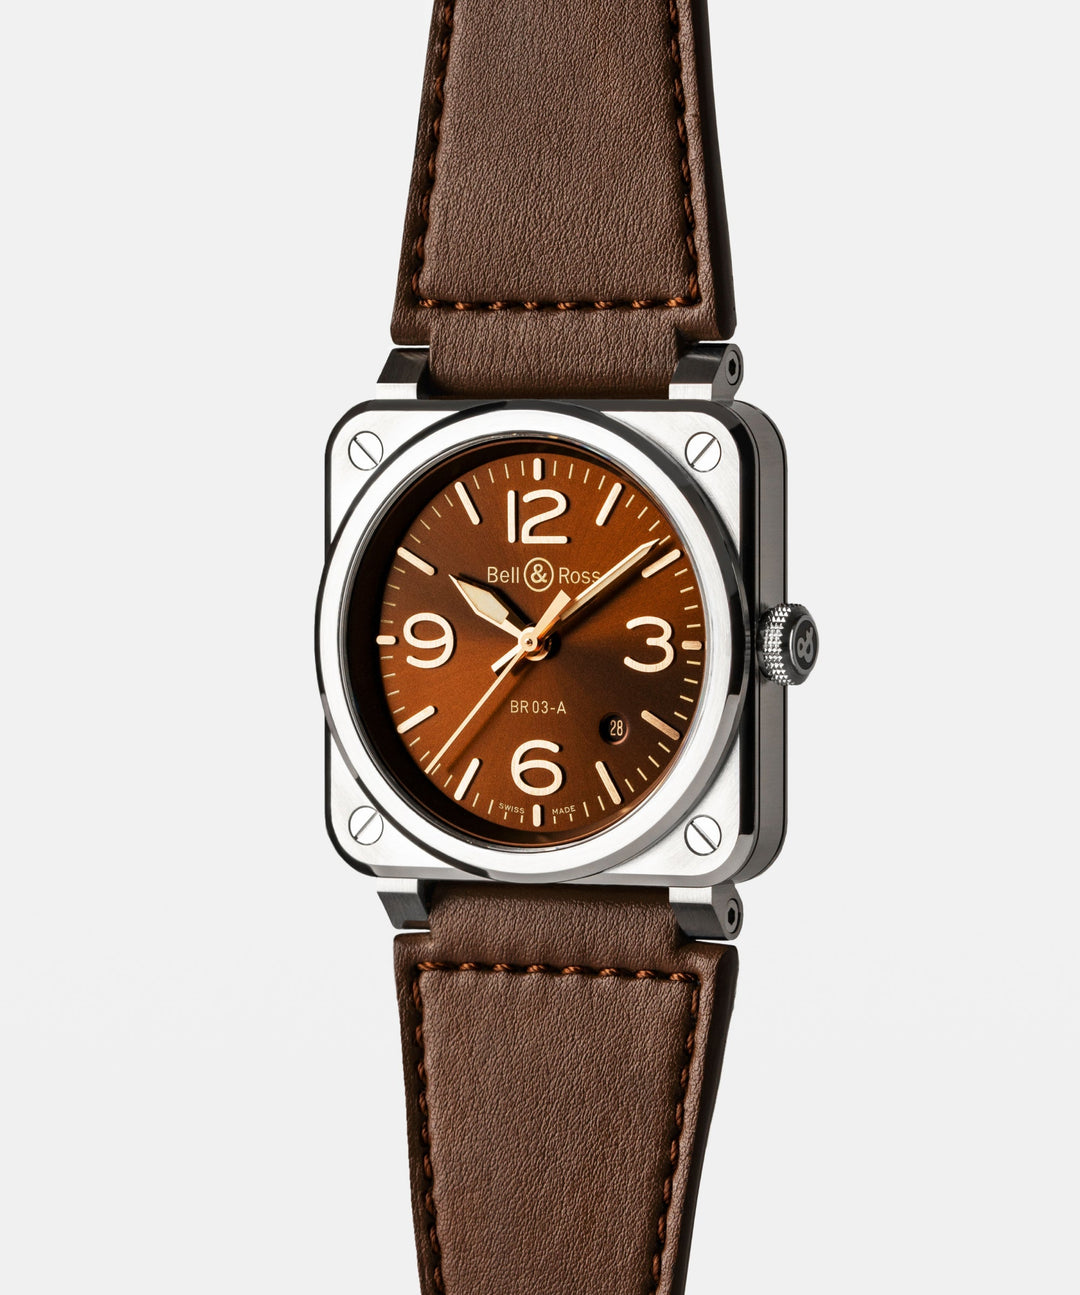 NEW BR 03 GOLDEN HERITAGE -  - Bell & Ross - Montre - Les Champs d'Or